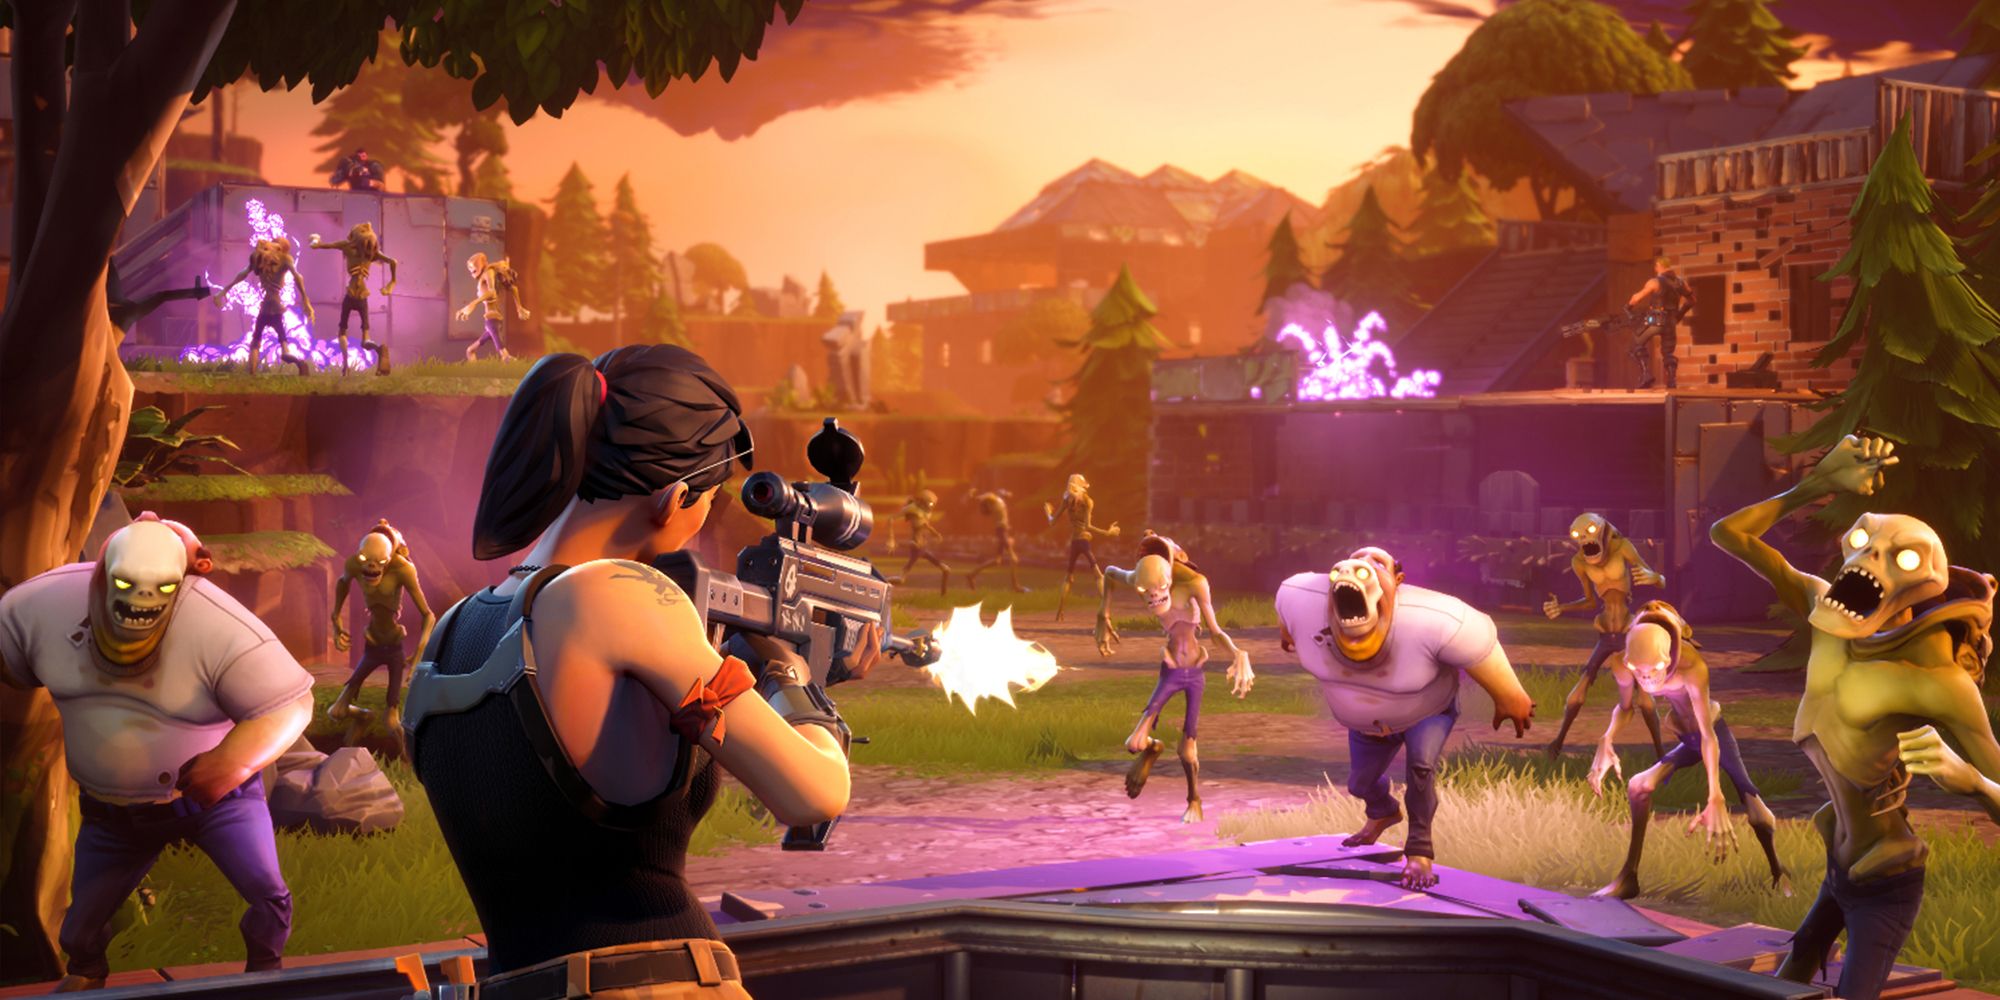 Fortnite - A Screenshot from the Save The World Main Game